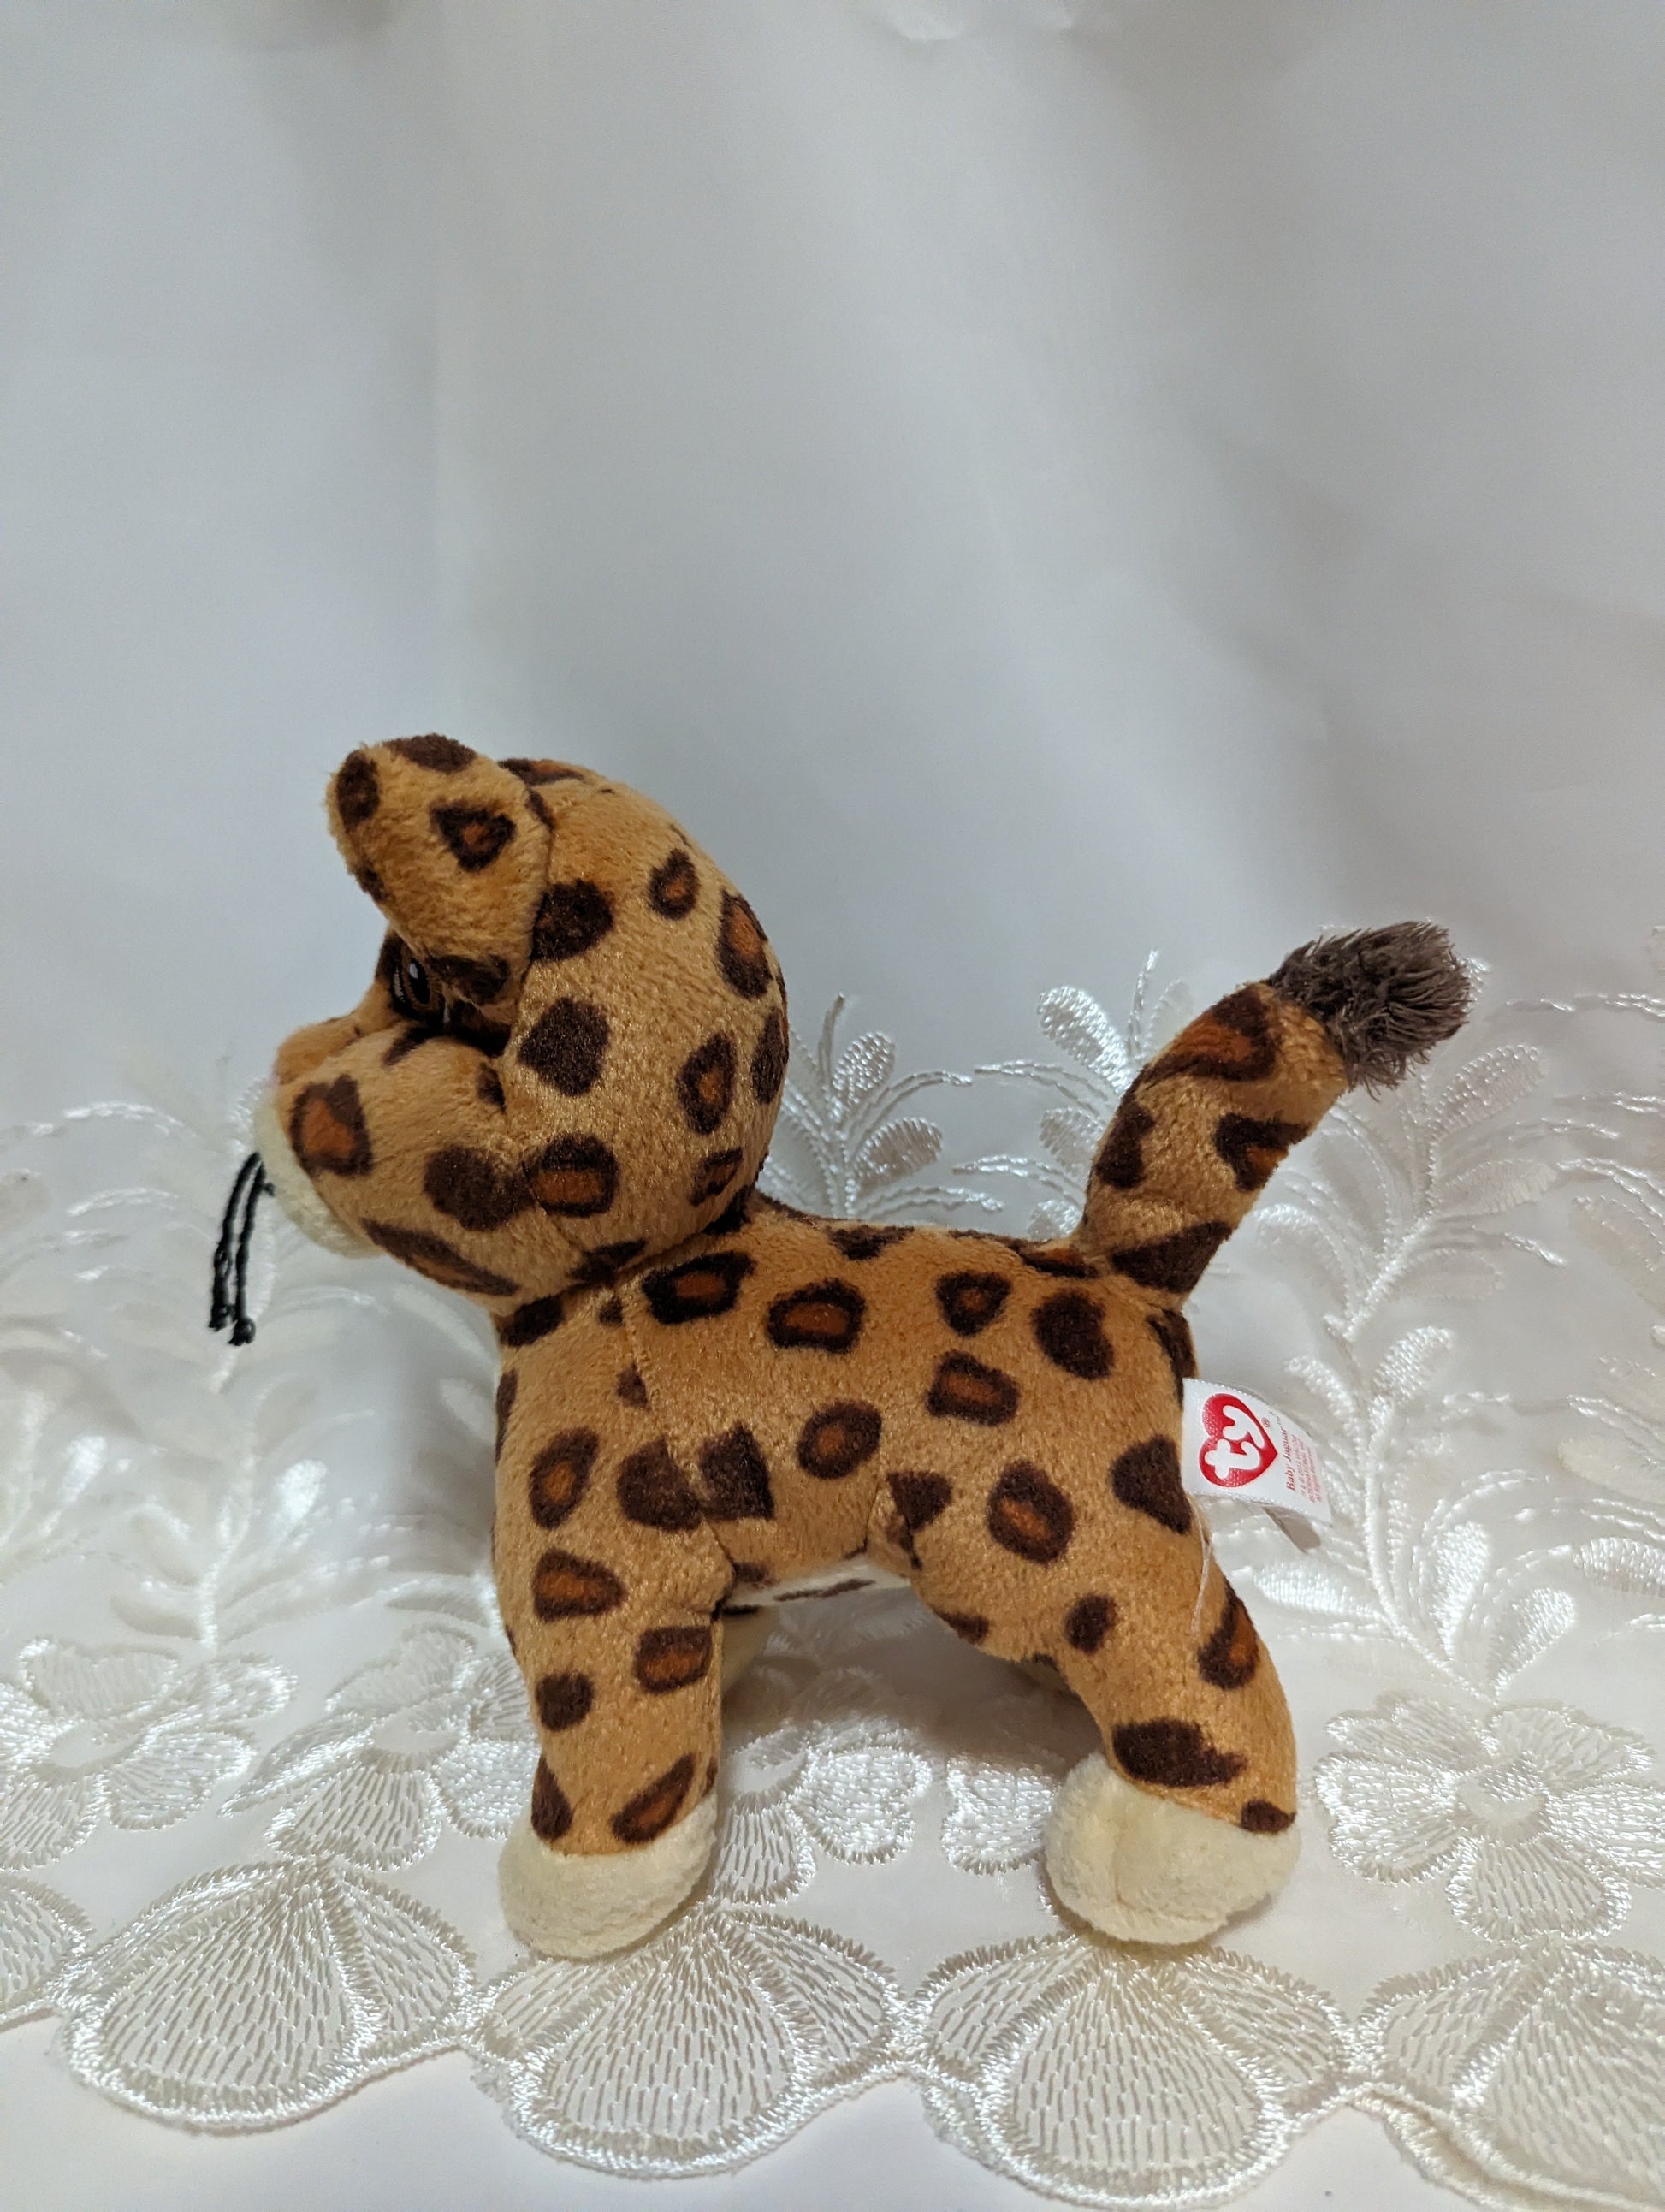 Ty Beanie Baby - Baby Jaguar from Go Diego Go! (6 in) No Hang Tag - Vintage Beanies Canada